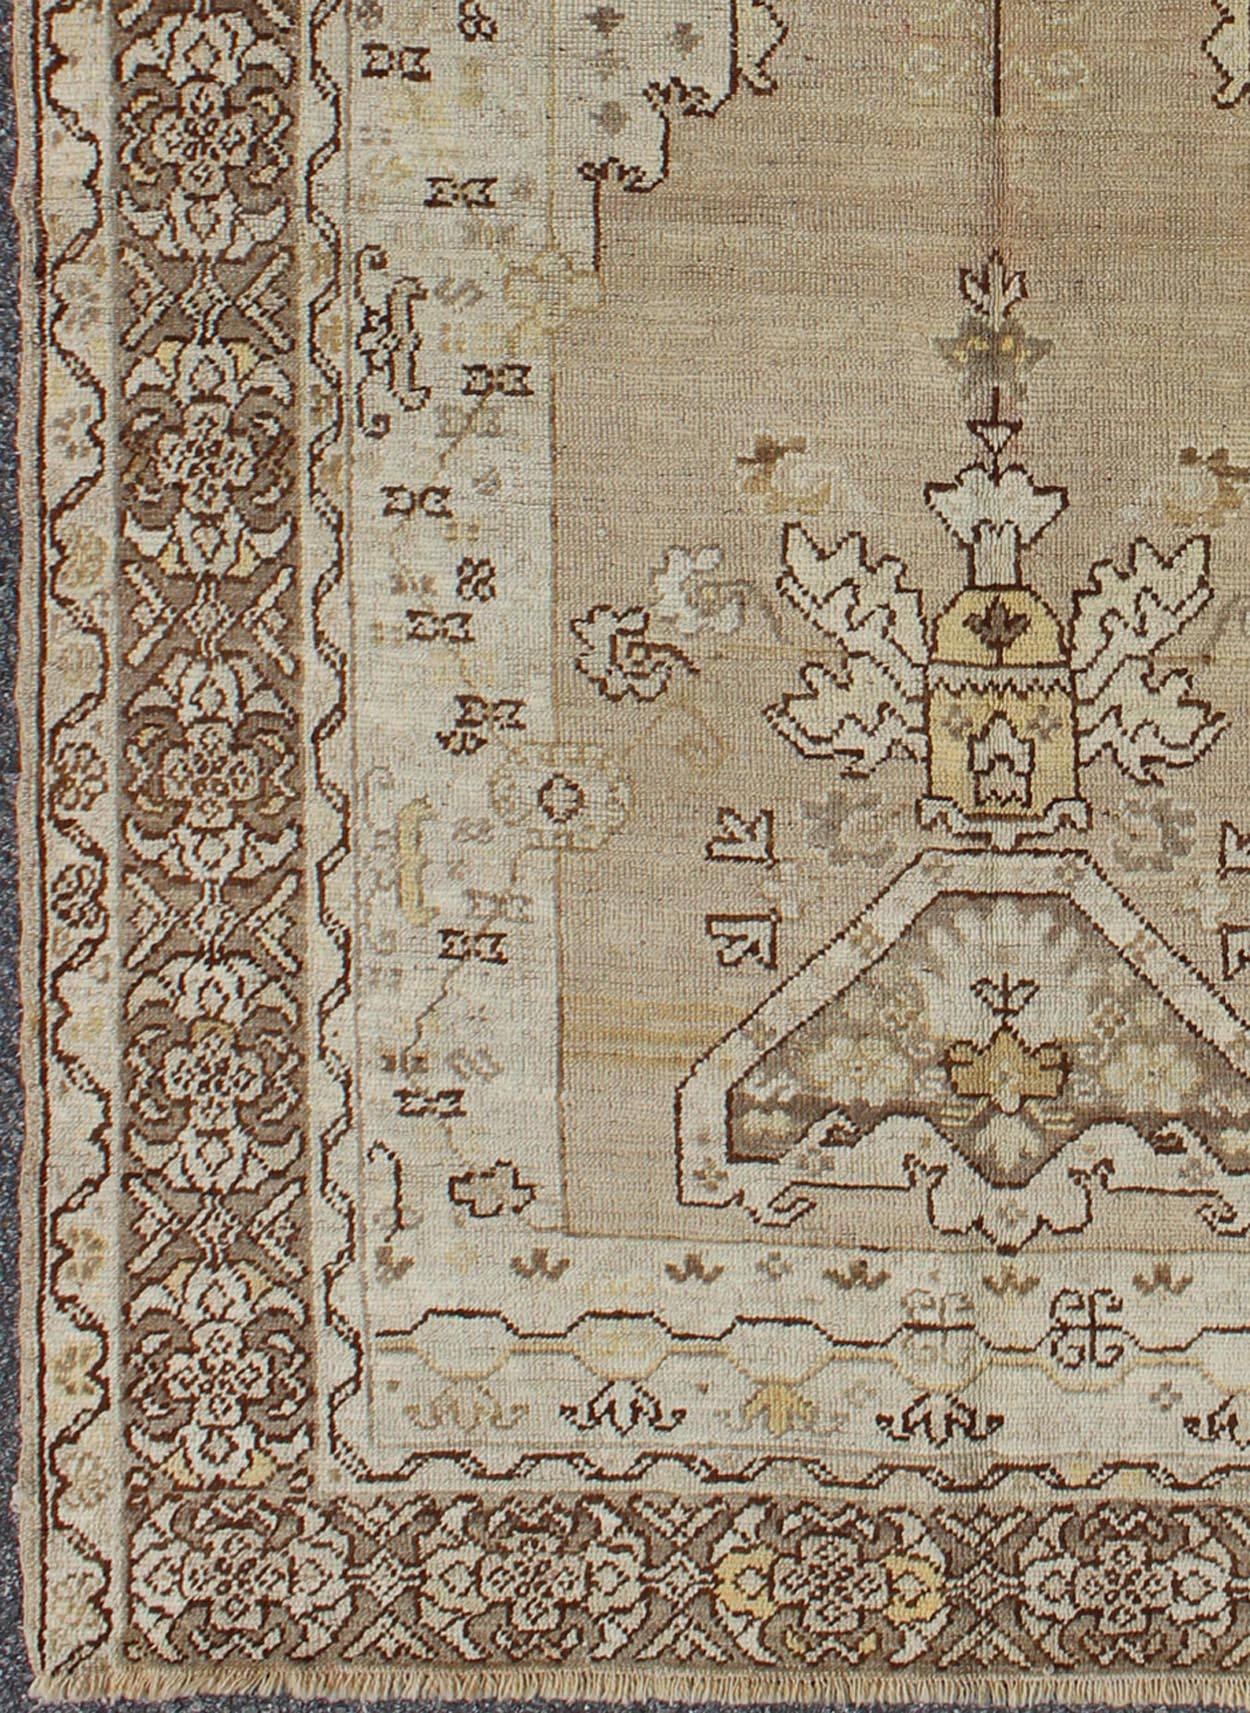 1920s antique Turkish Oushak prayer rug with flowers in ivory, taupe and cream, rug mh-10638, country of origin / type: Turkey / Oushak, circa 1920

This lovely and finely woven antique Turkish Oushak rug (circa 1920) displays a prayer design set